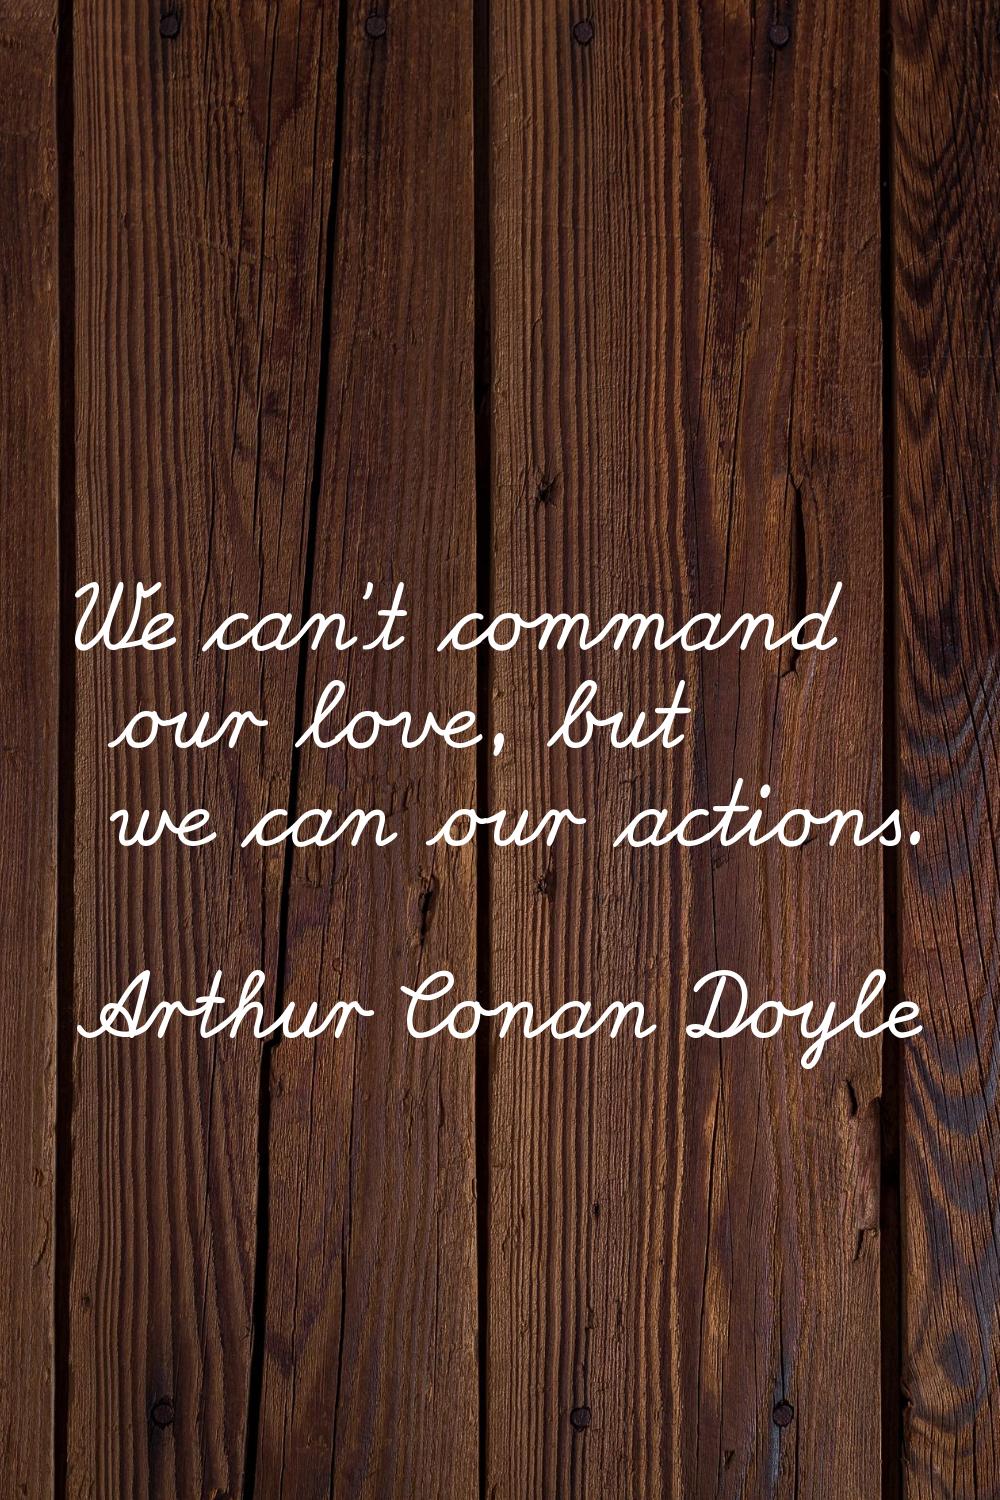 We can't command our love, but we can our actions.